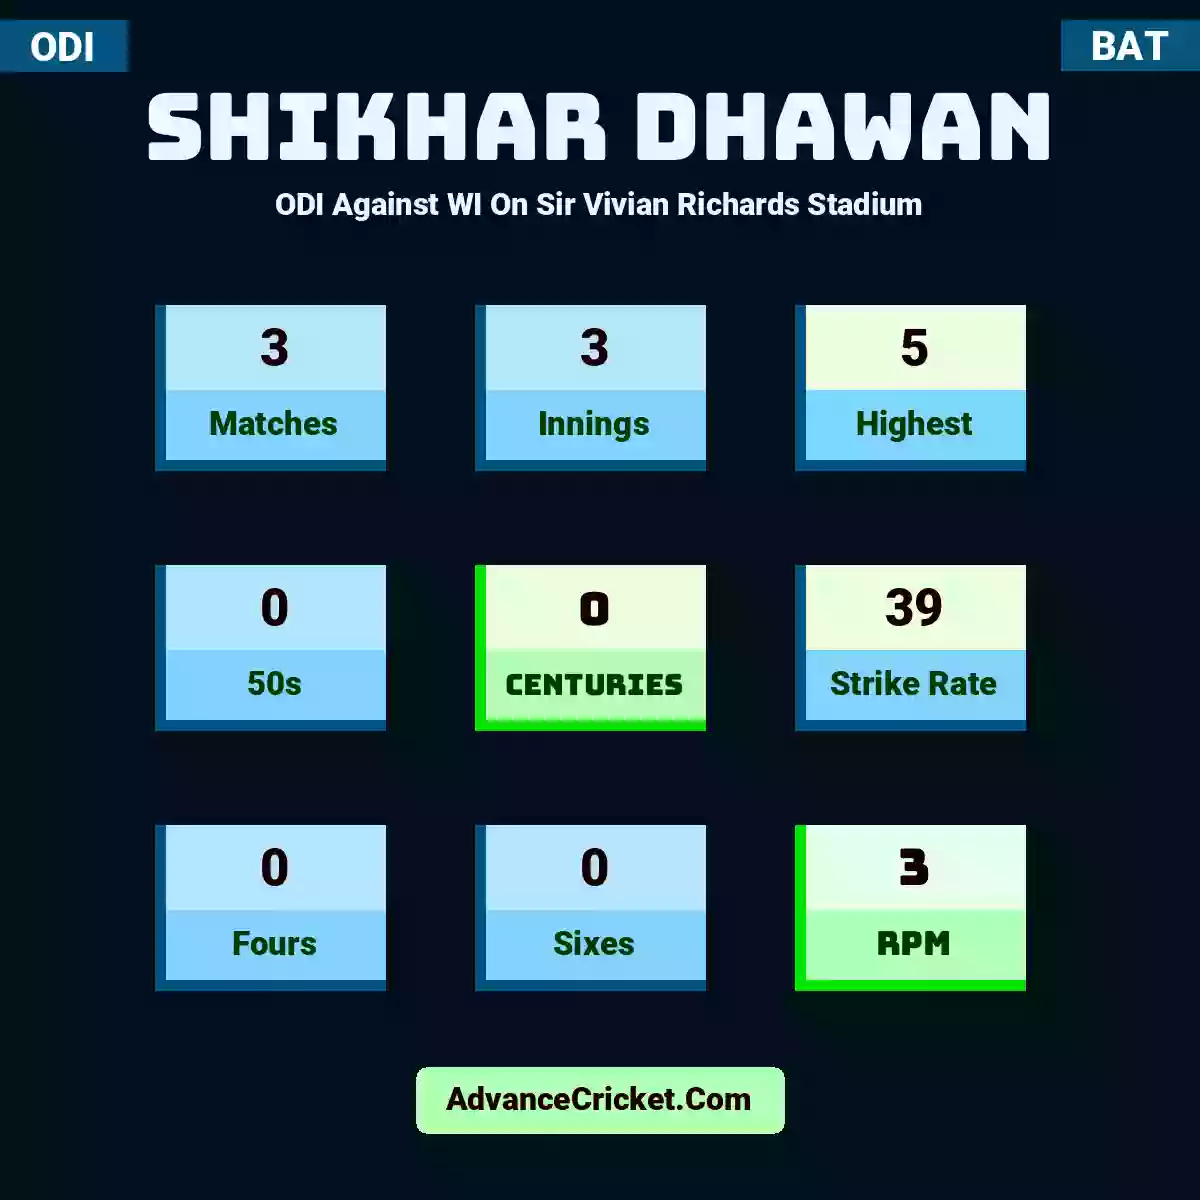 Shikhar Dhawan ODI  Against WI On Sir Vivian Richards Stadium, Shikhar Dhawan played 3 matches, scored 5 runs as highest, 0 half-centuries, and 0 centuries, with a strike rate of 39. S.Dhawan hit 0 fours and 0 sixes, with an RPM of 3.